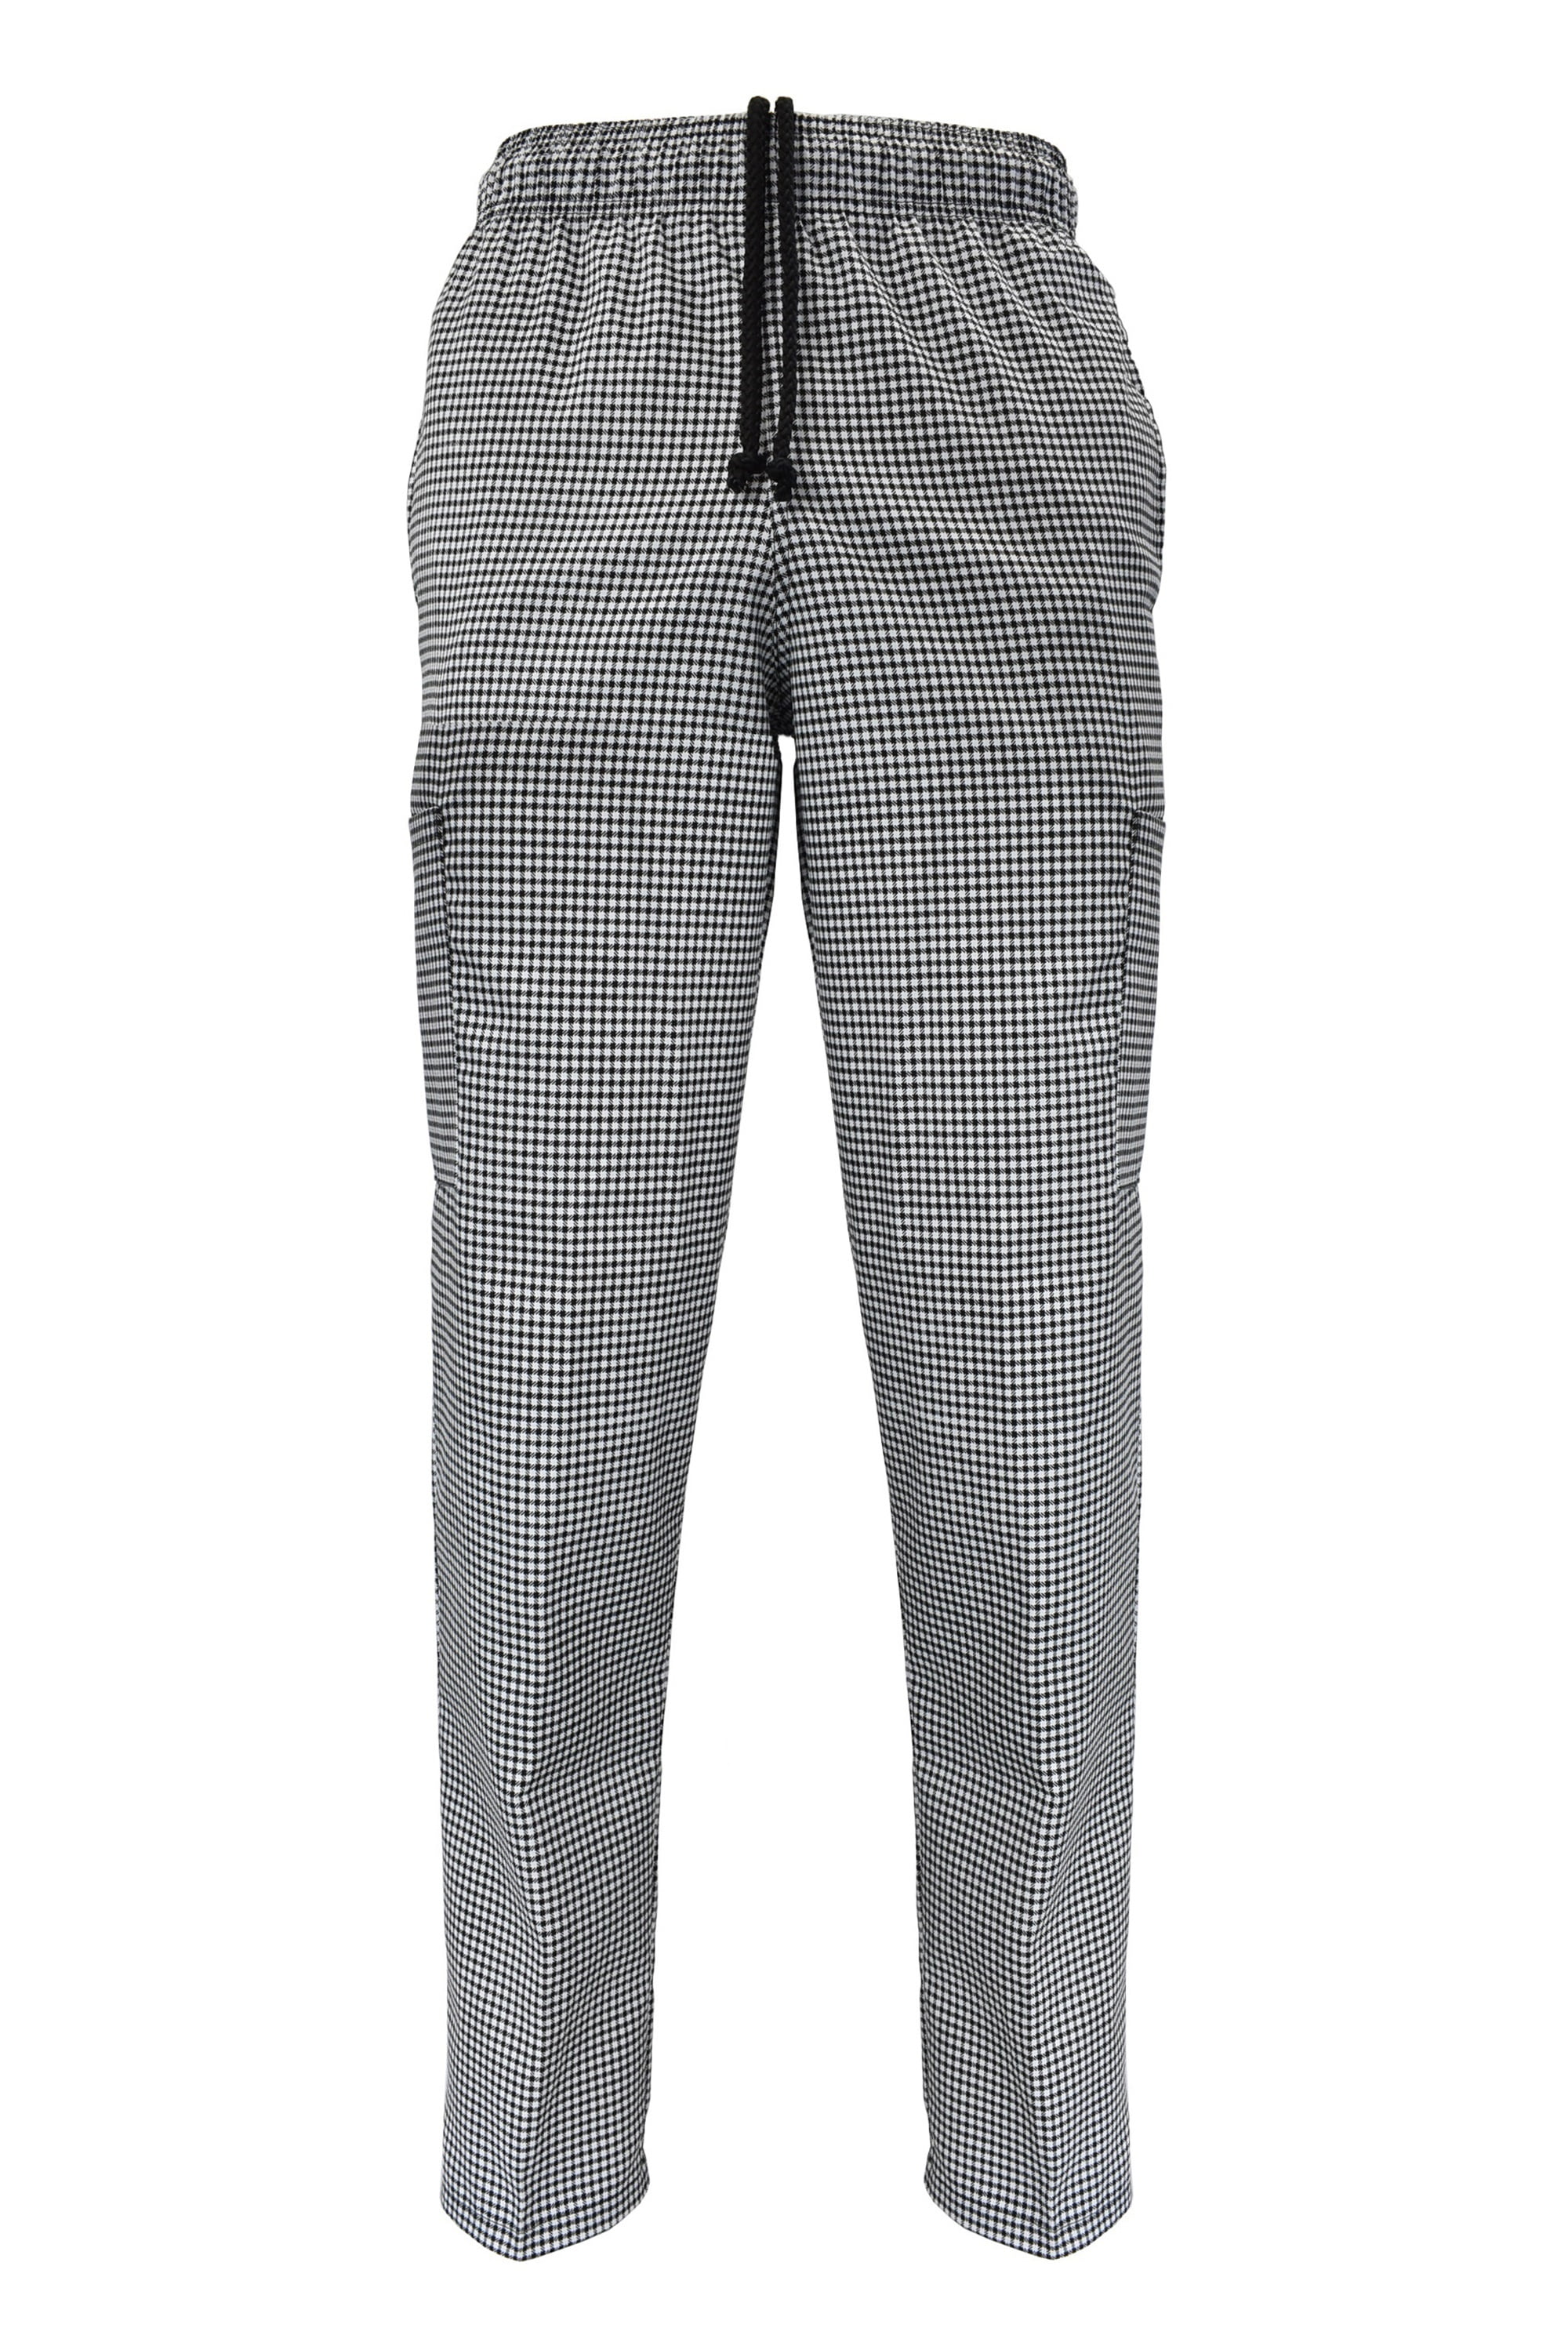 Natural Uniforms Classic Chalkstripe Chef Pants-100% Cotton with Multi-Pack QTYS Available 